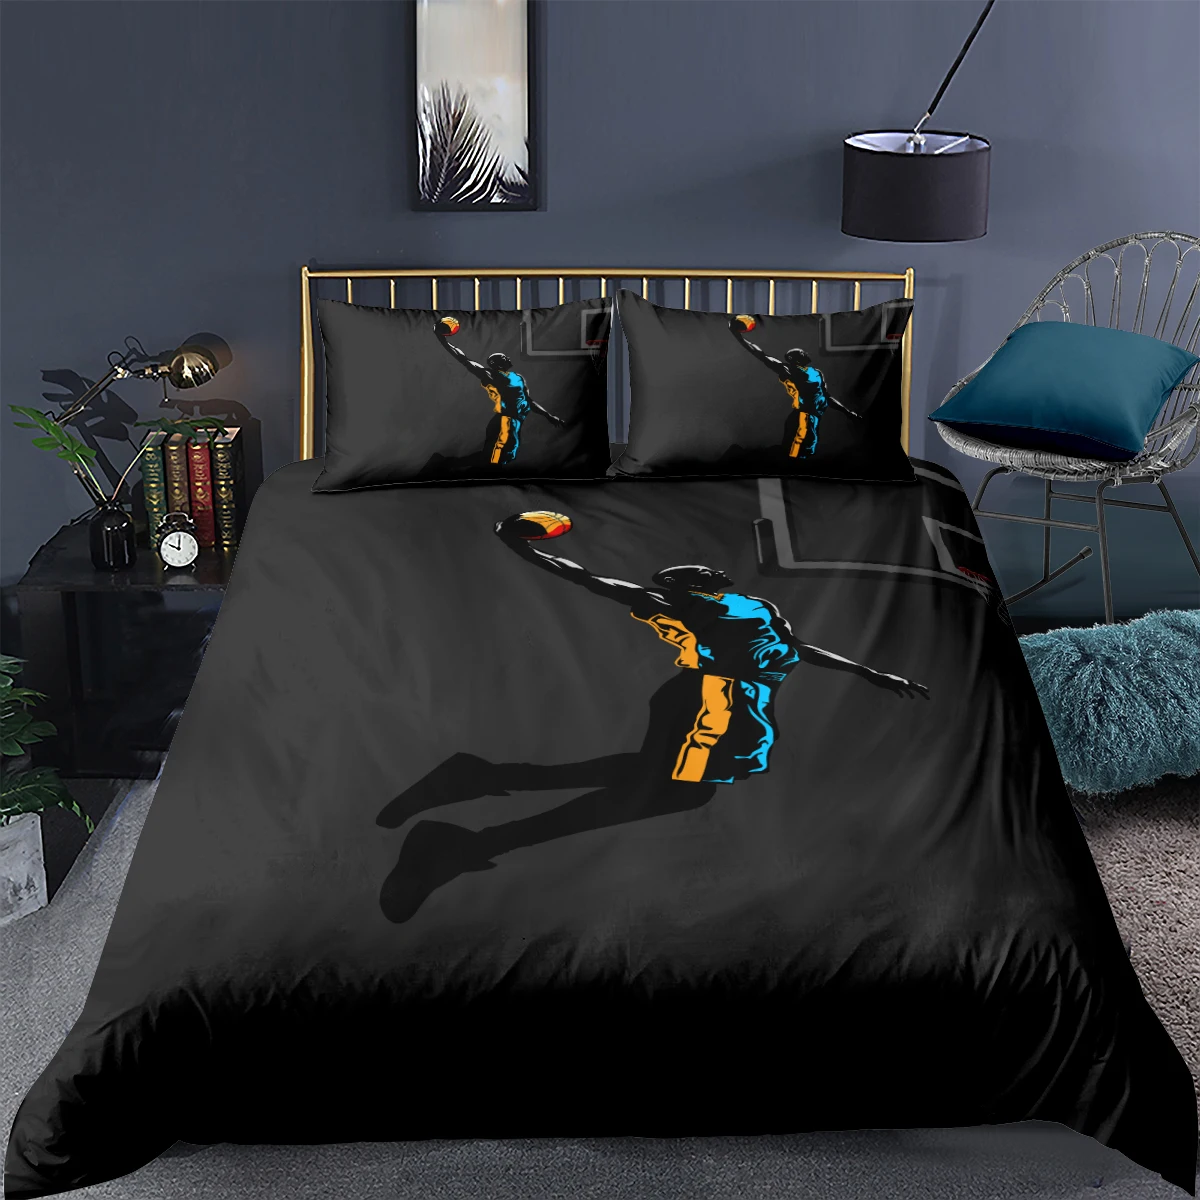 

Baskball Quilt Cover Set 3D Black Comforter Covers Pillow Slips Full Double Single Twin Queen King Size 140*200cm Bedclothes